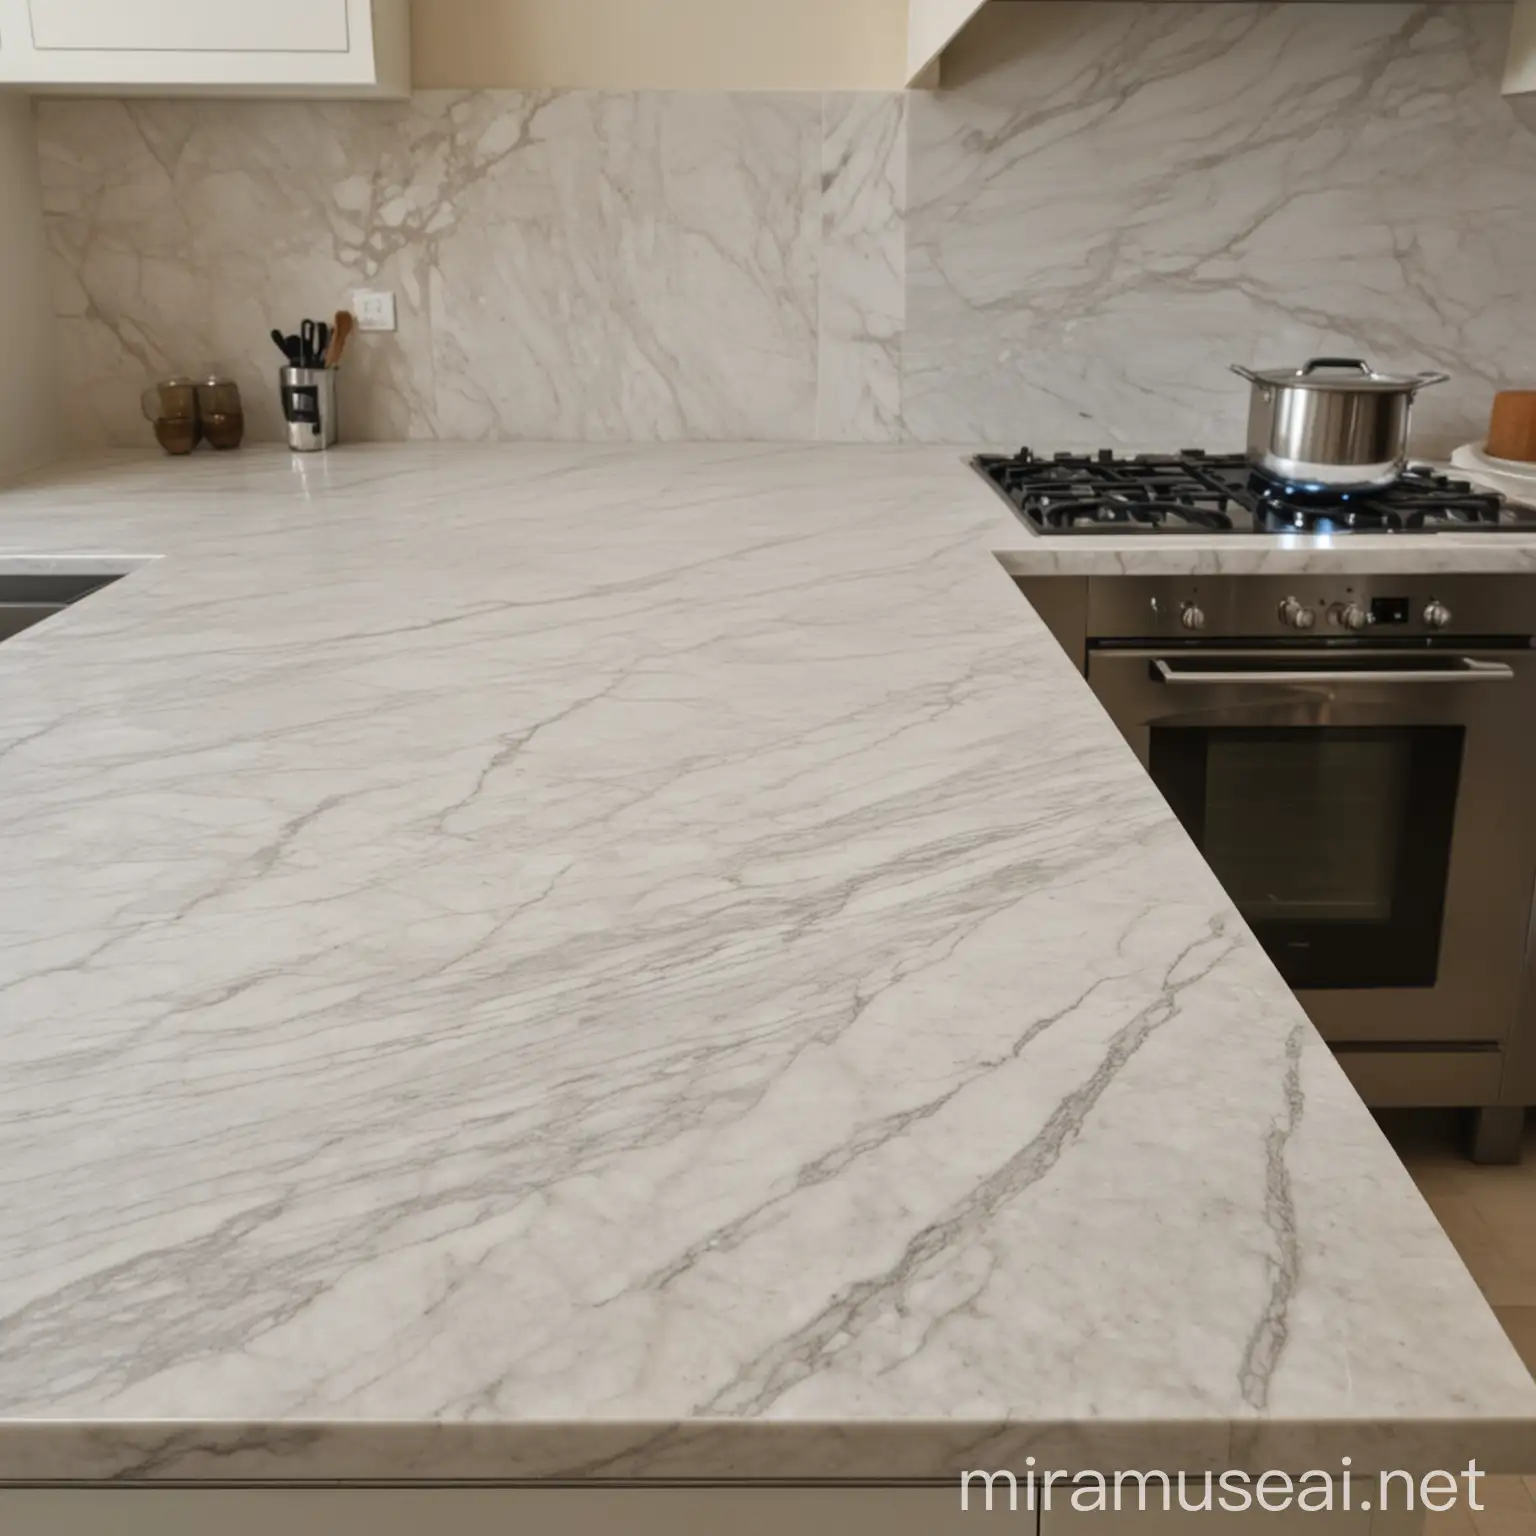 Light Marble Tabletop in Kitchen Setting